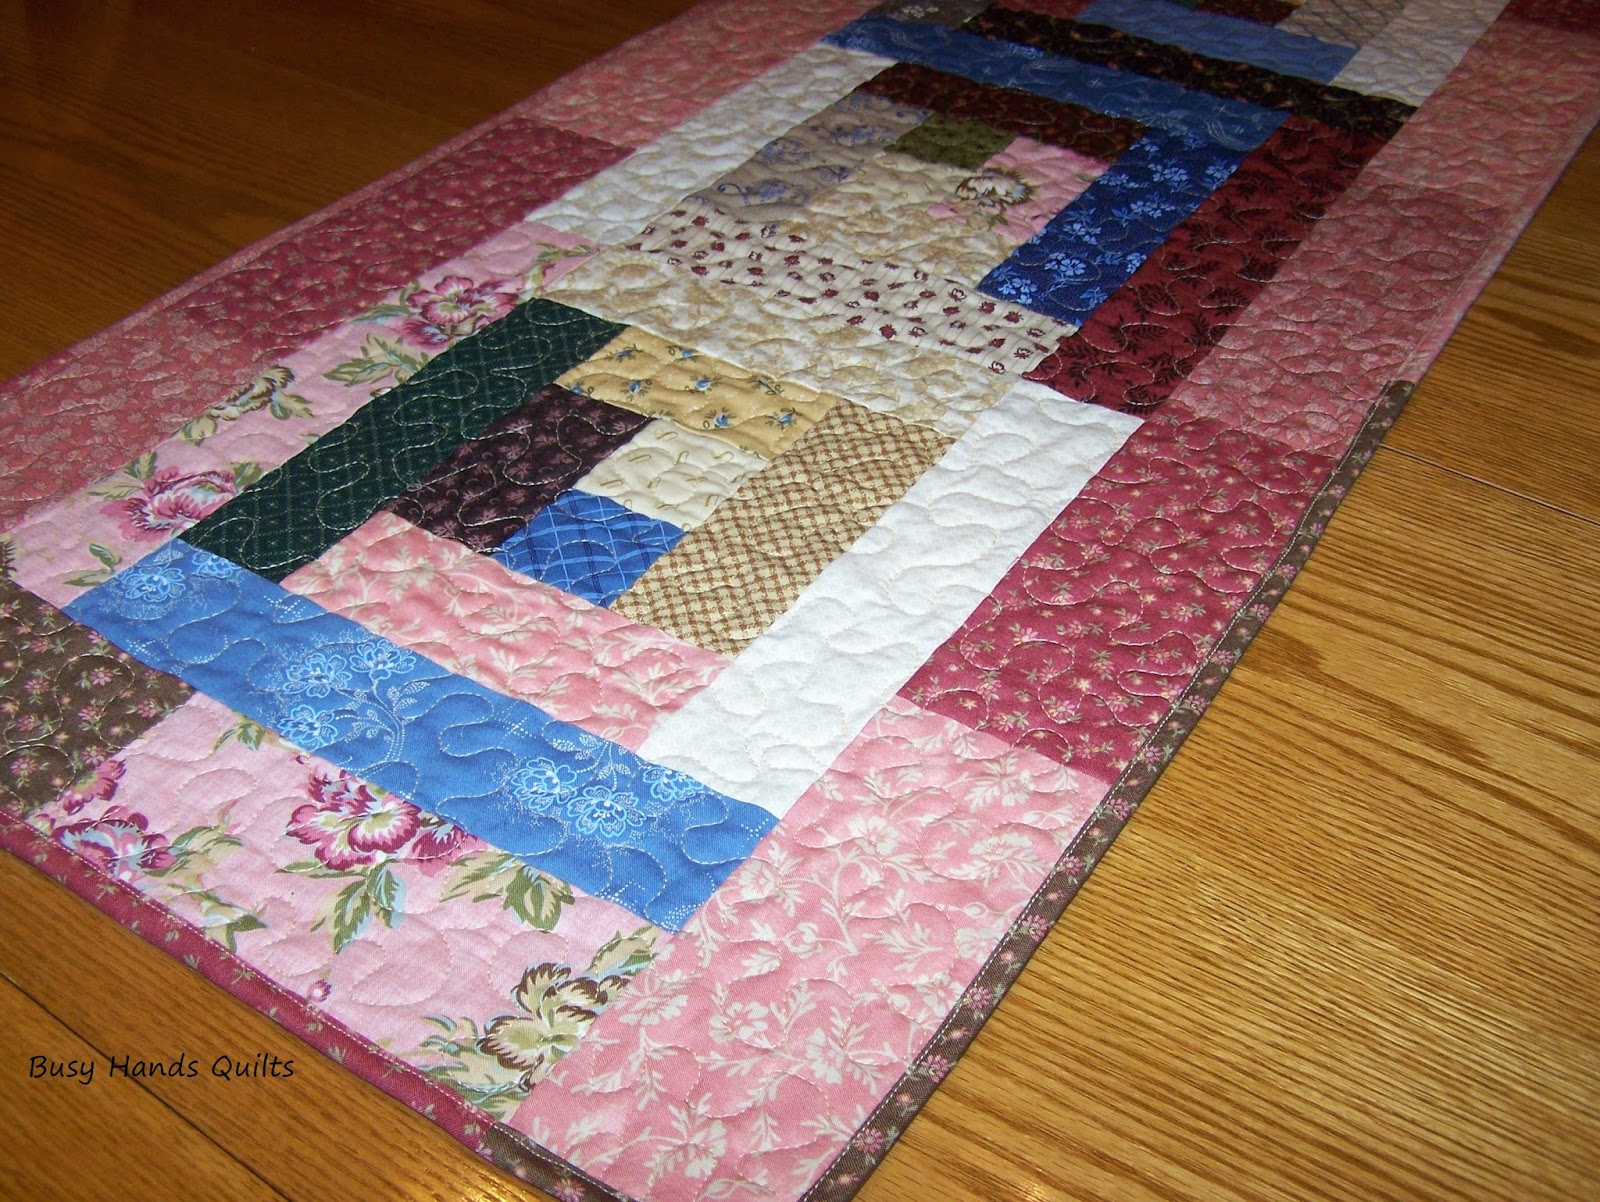 Busy Hands Quilts: Thimbleberries Log Cabin Table Runner in Mauve